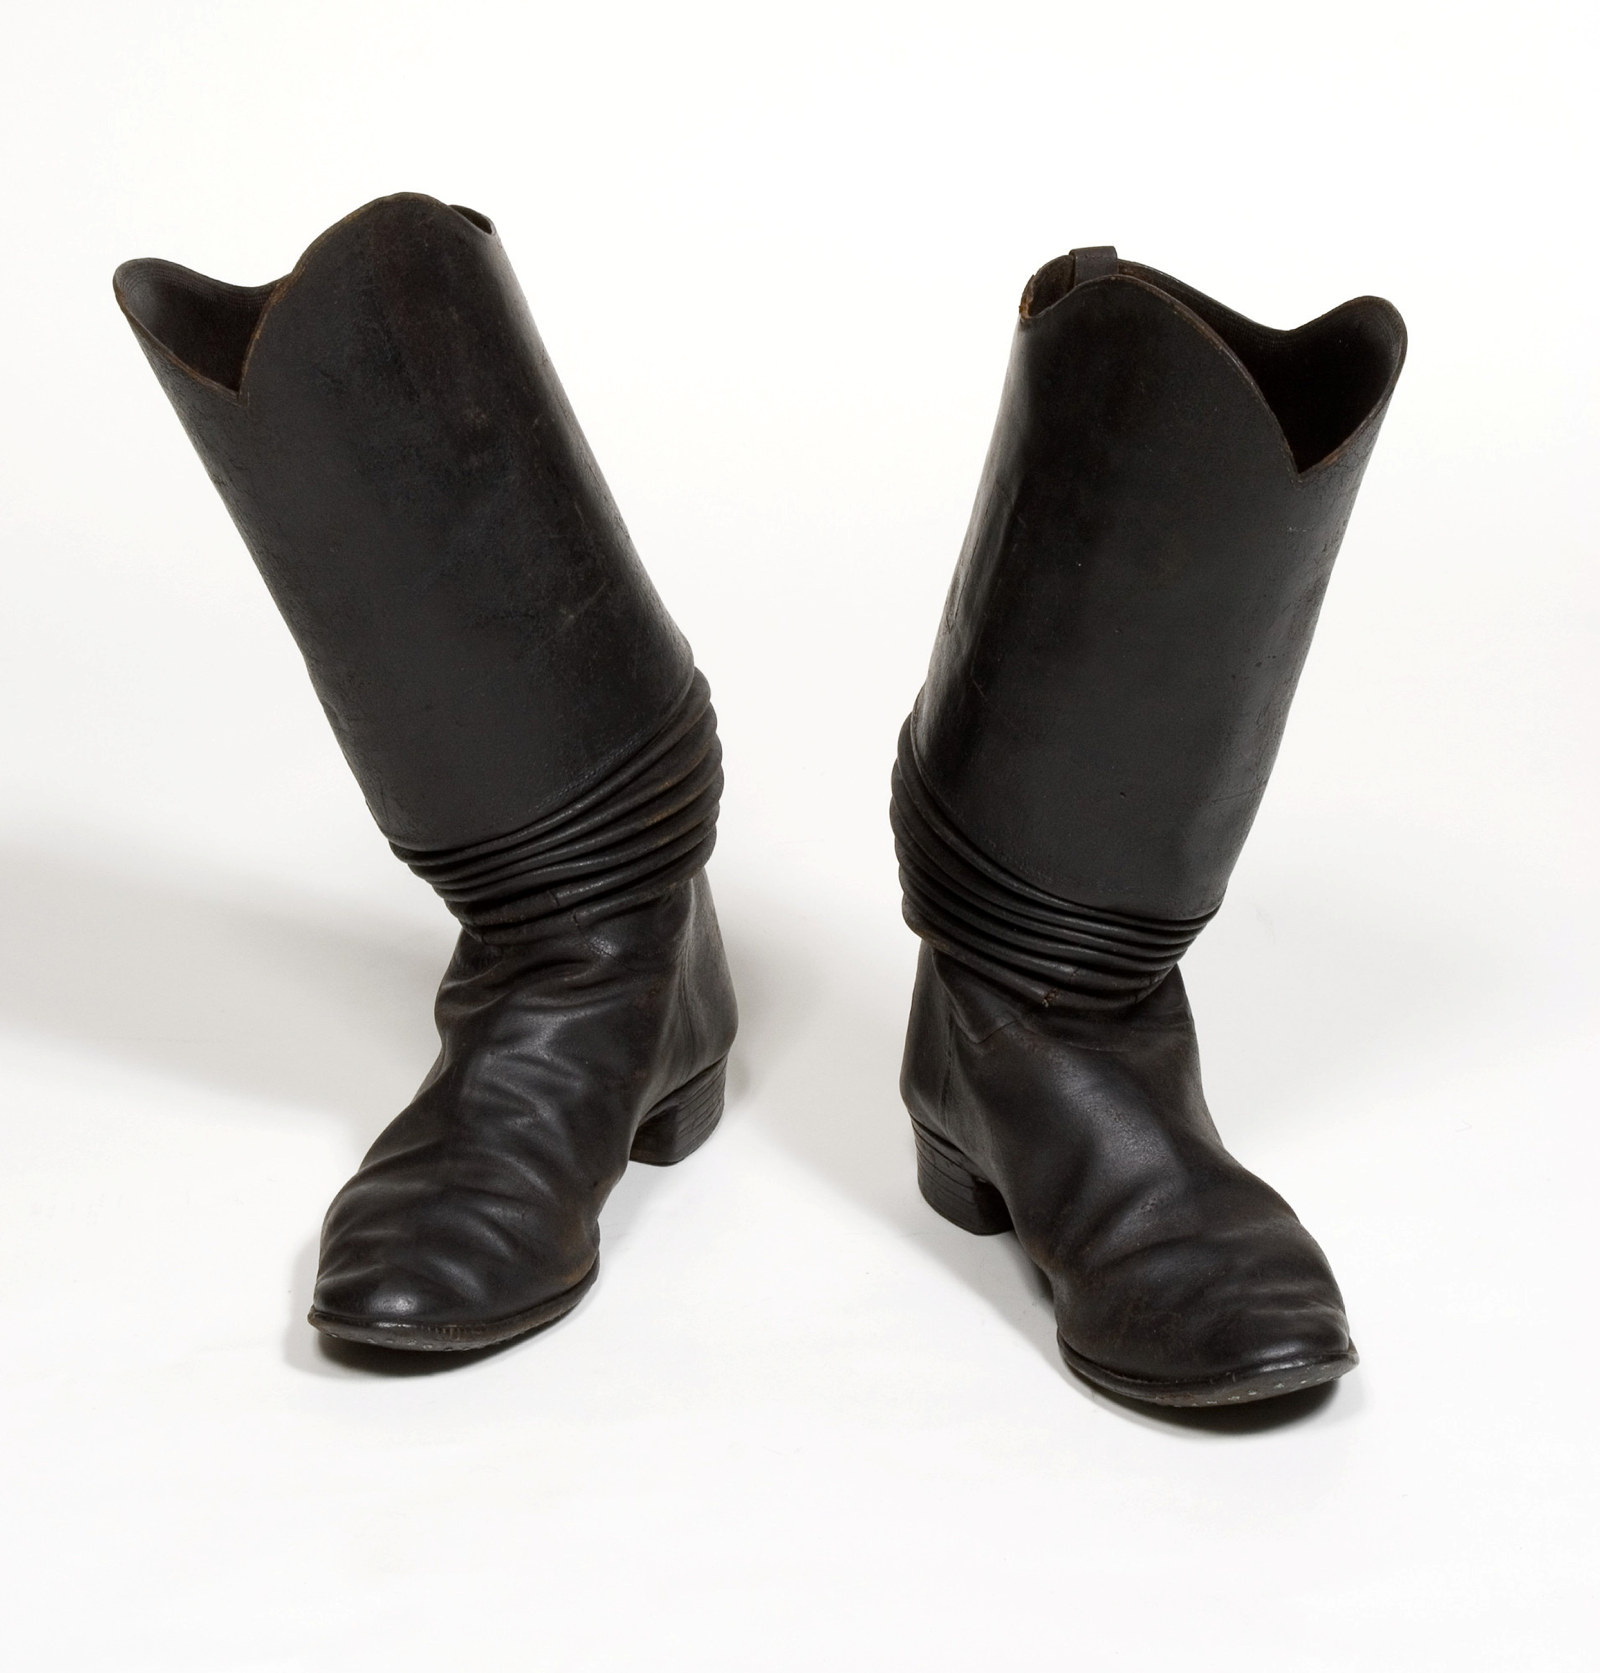 Mounted police riding boots